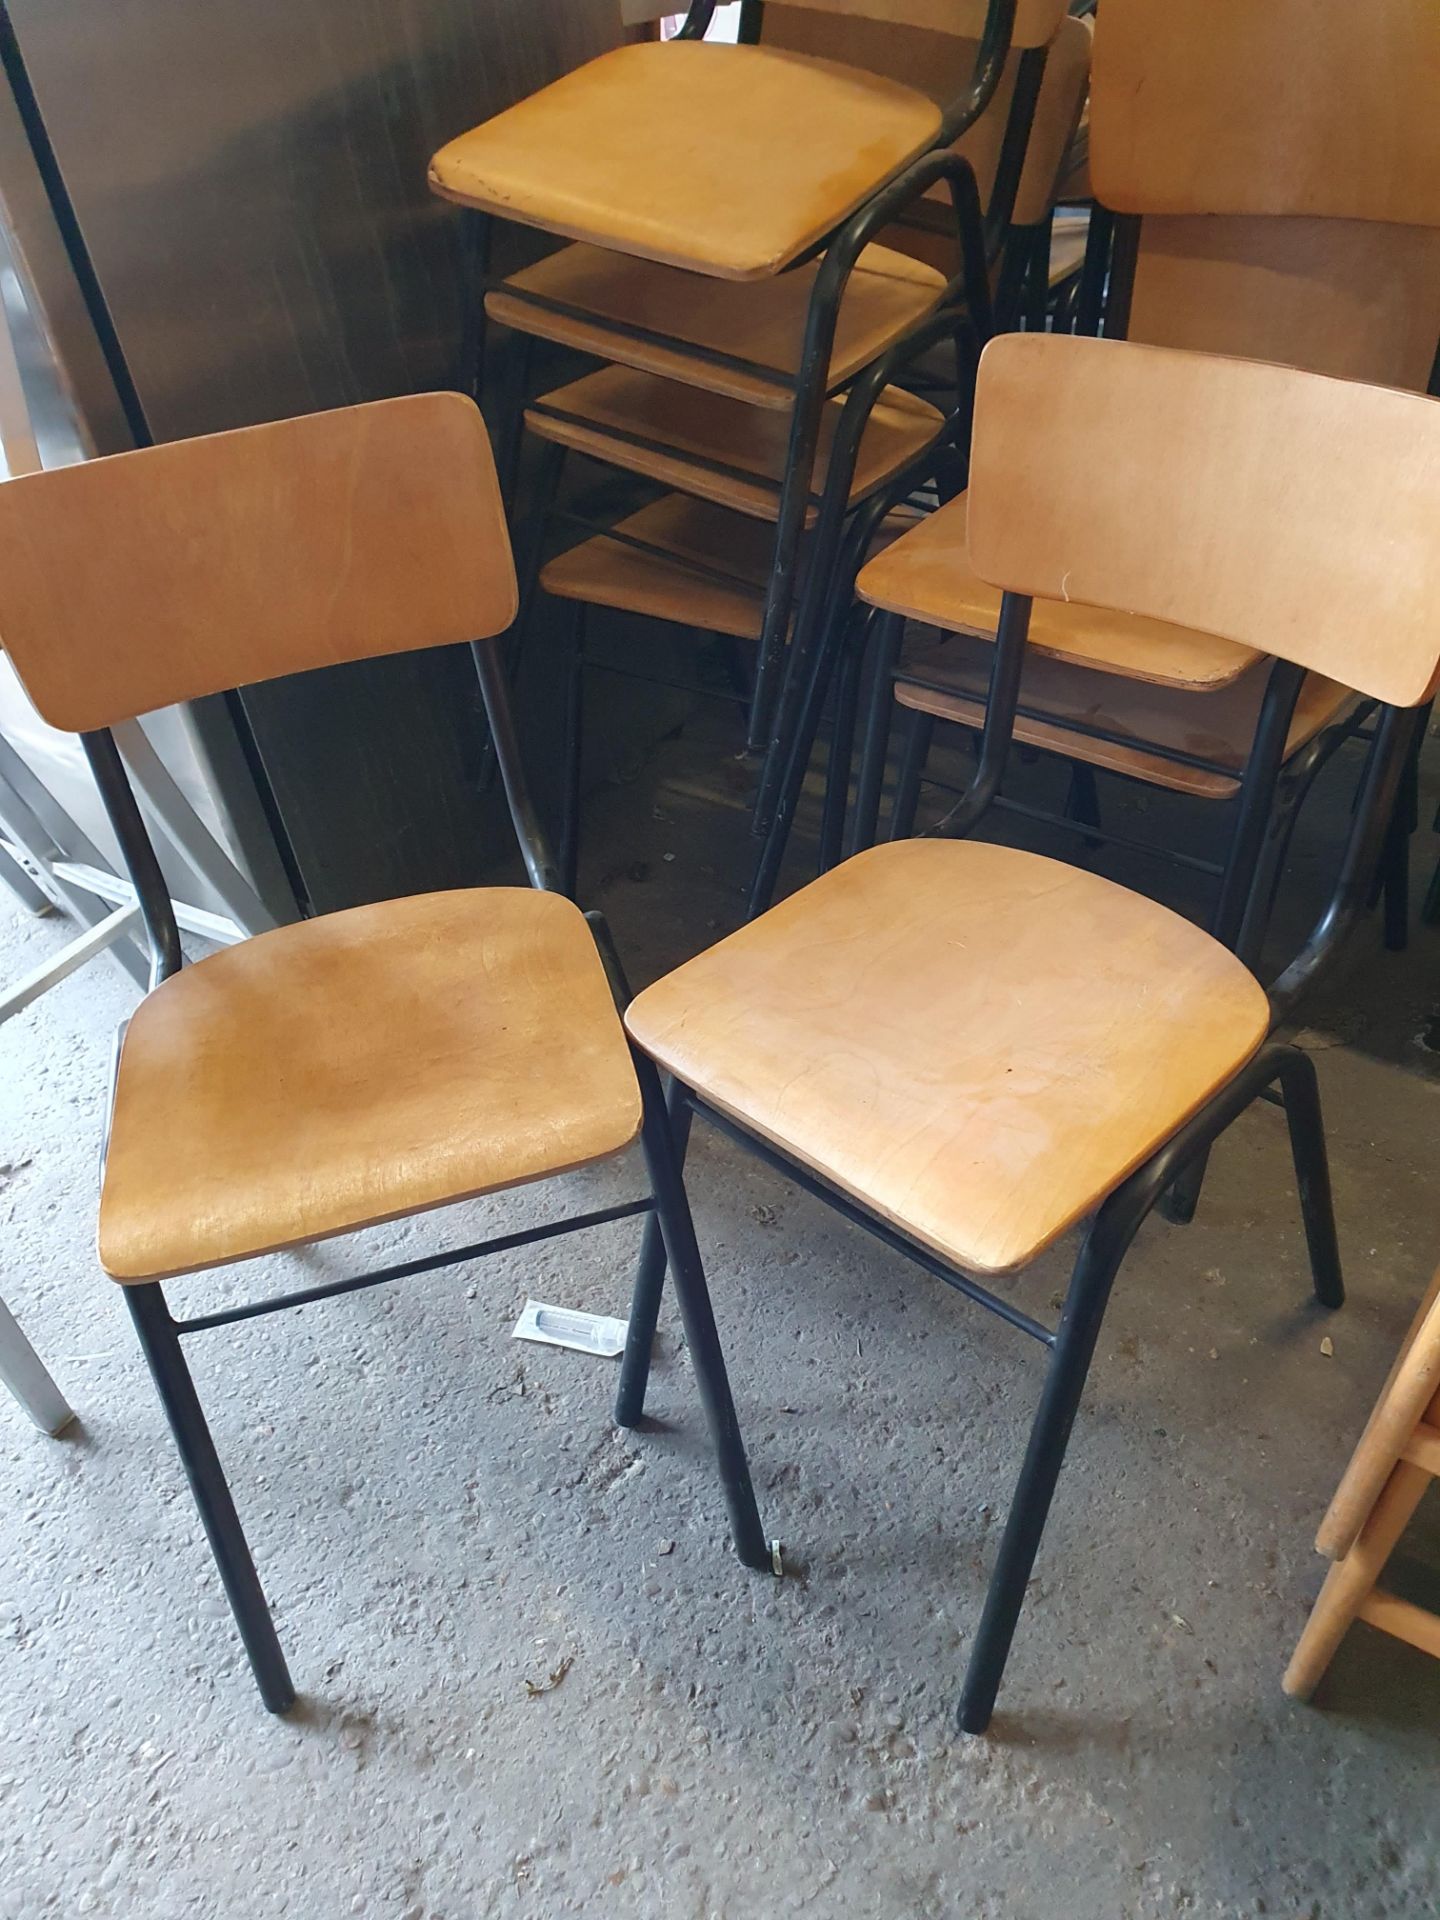 * 4 x chairs - metal frame with ply seats/backs